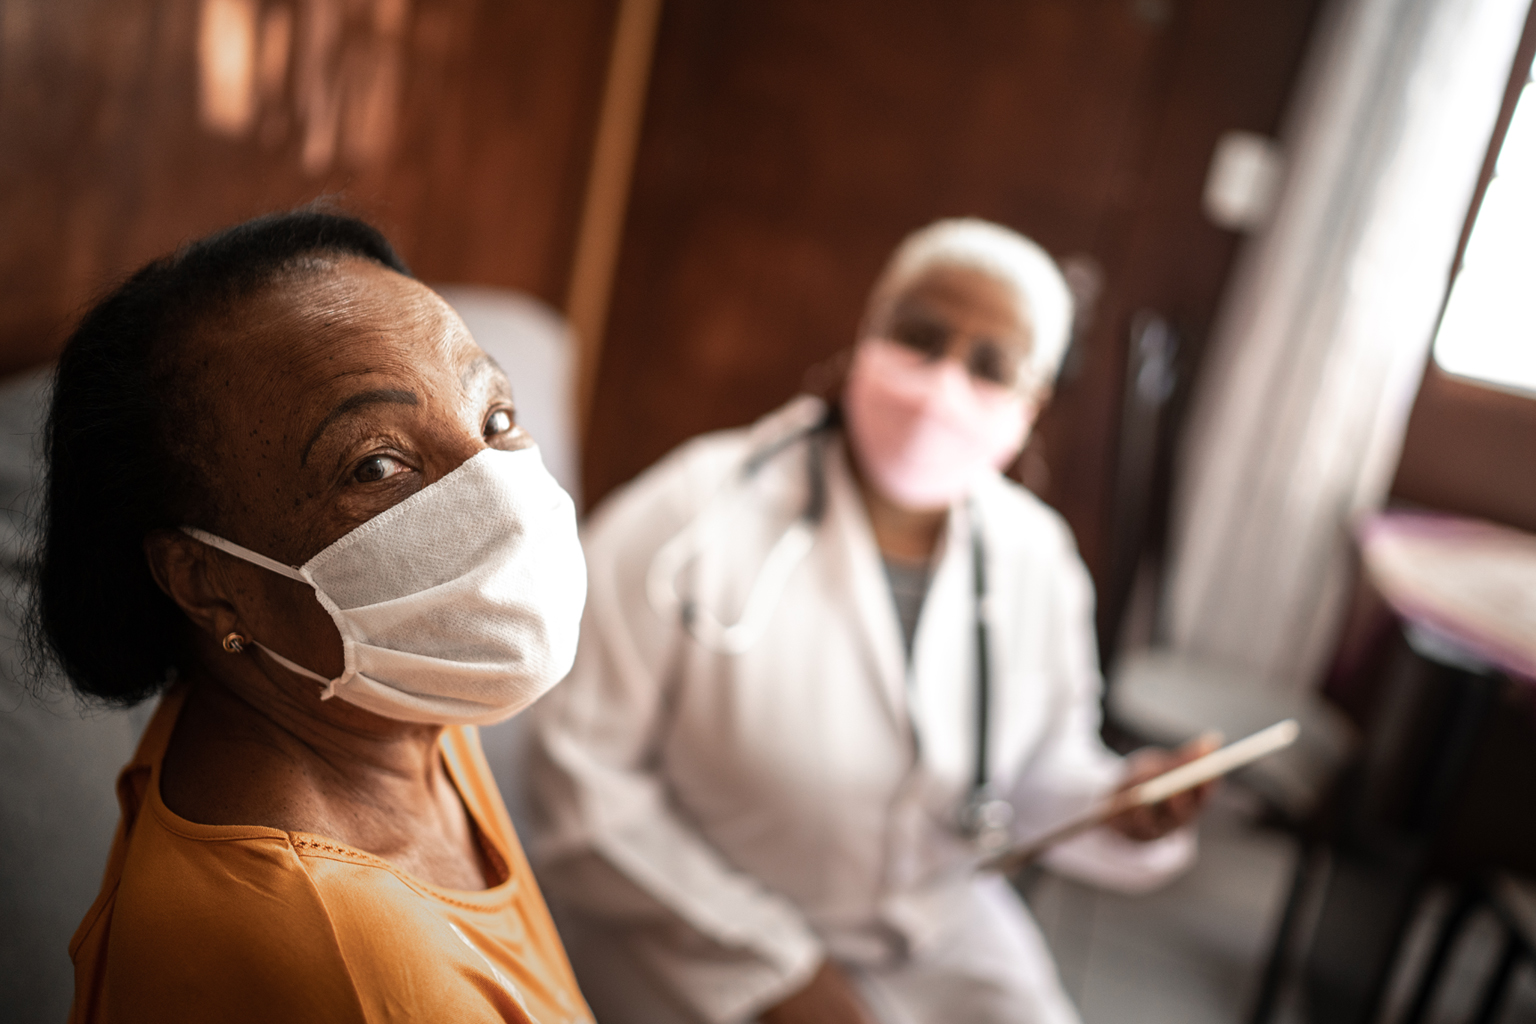 Older woman sitting in office with doctor, both wearing masks